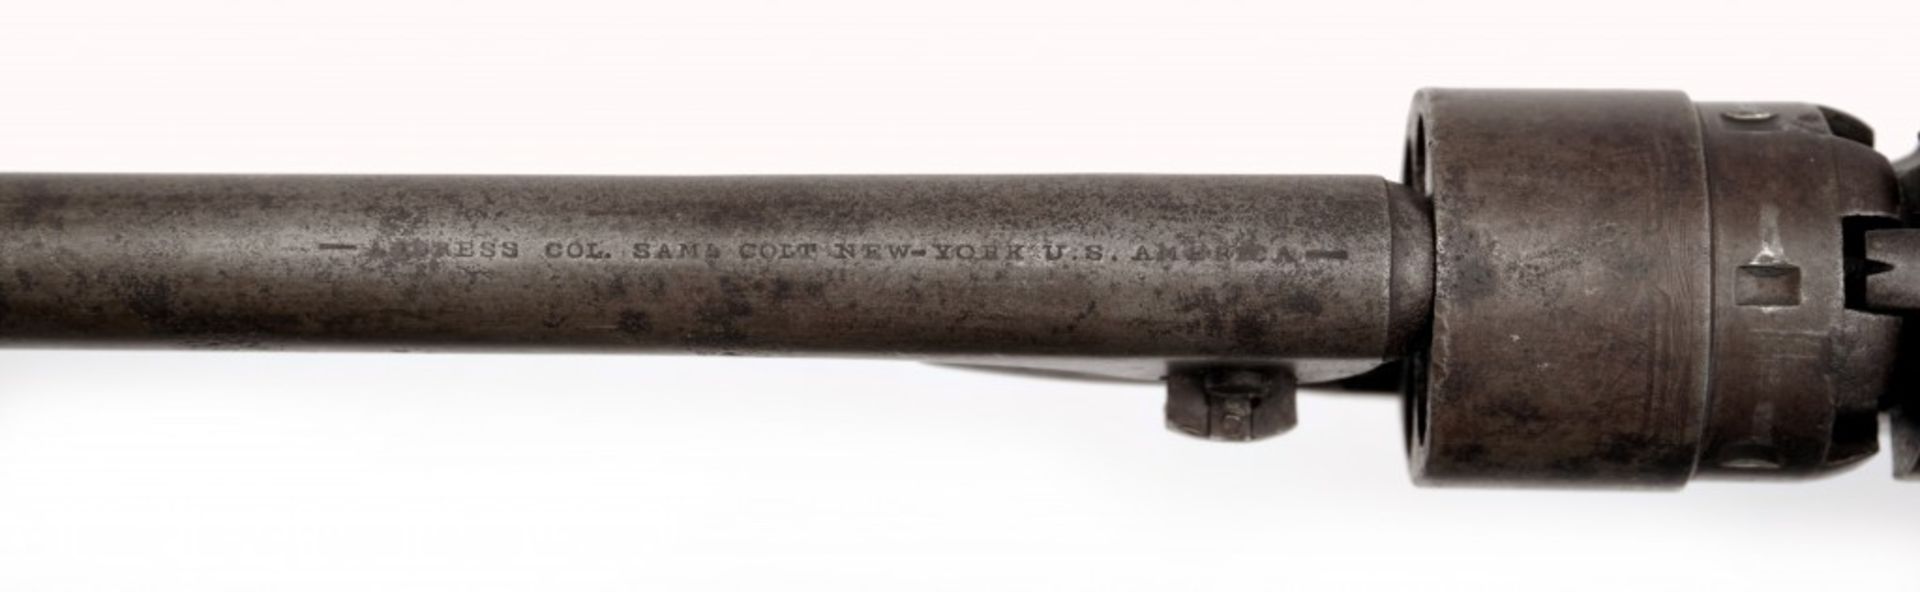 Colt M 1860 Army - Image 5 of 5